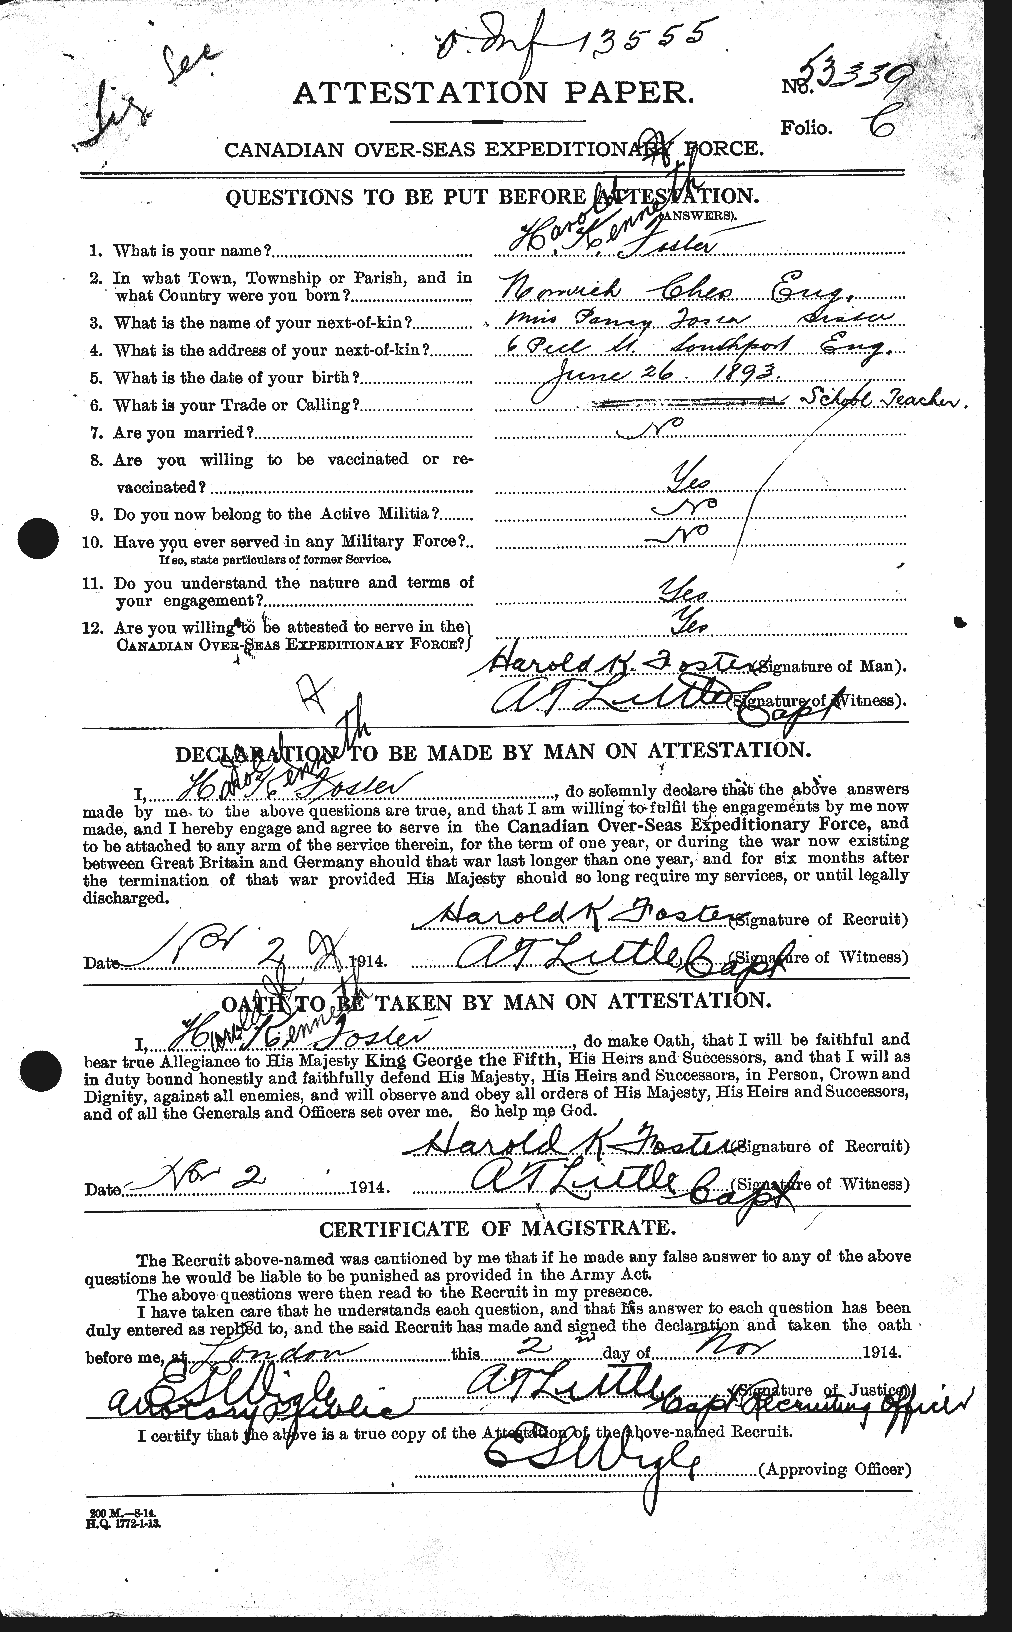 Personnel Records of the First World War - CEF 330729a